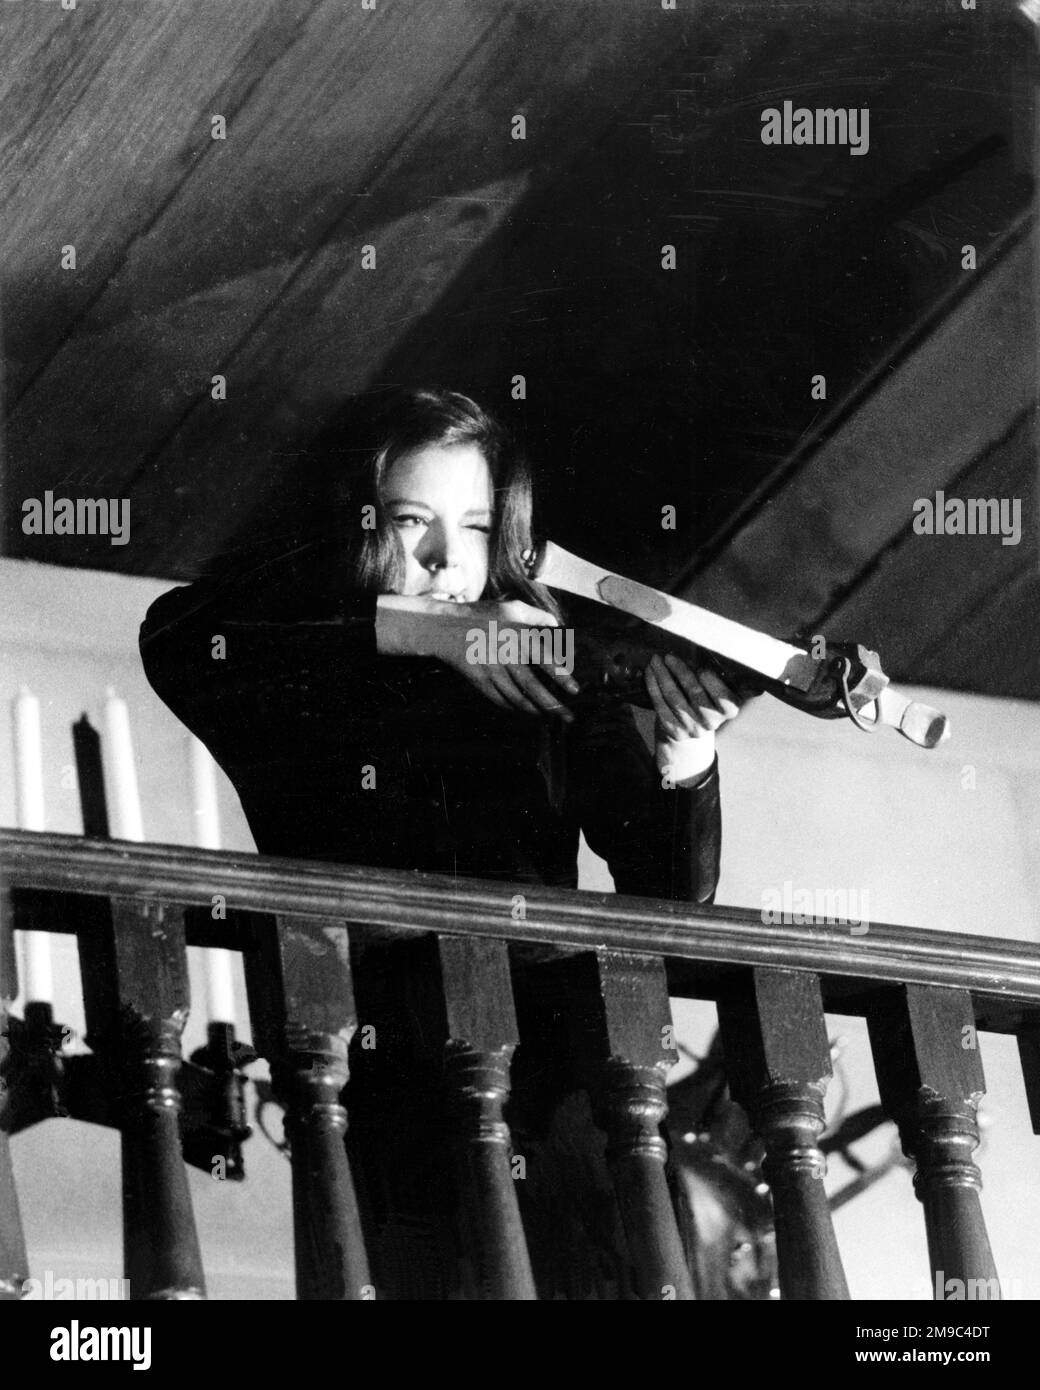 Emma Peel of 'The Avengers', played by Diana Rigg, firing a crossbow during filming of an episode Stock Photo